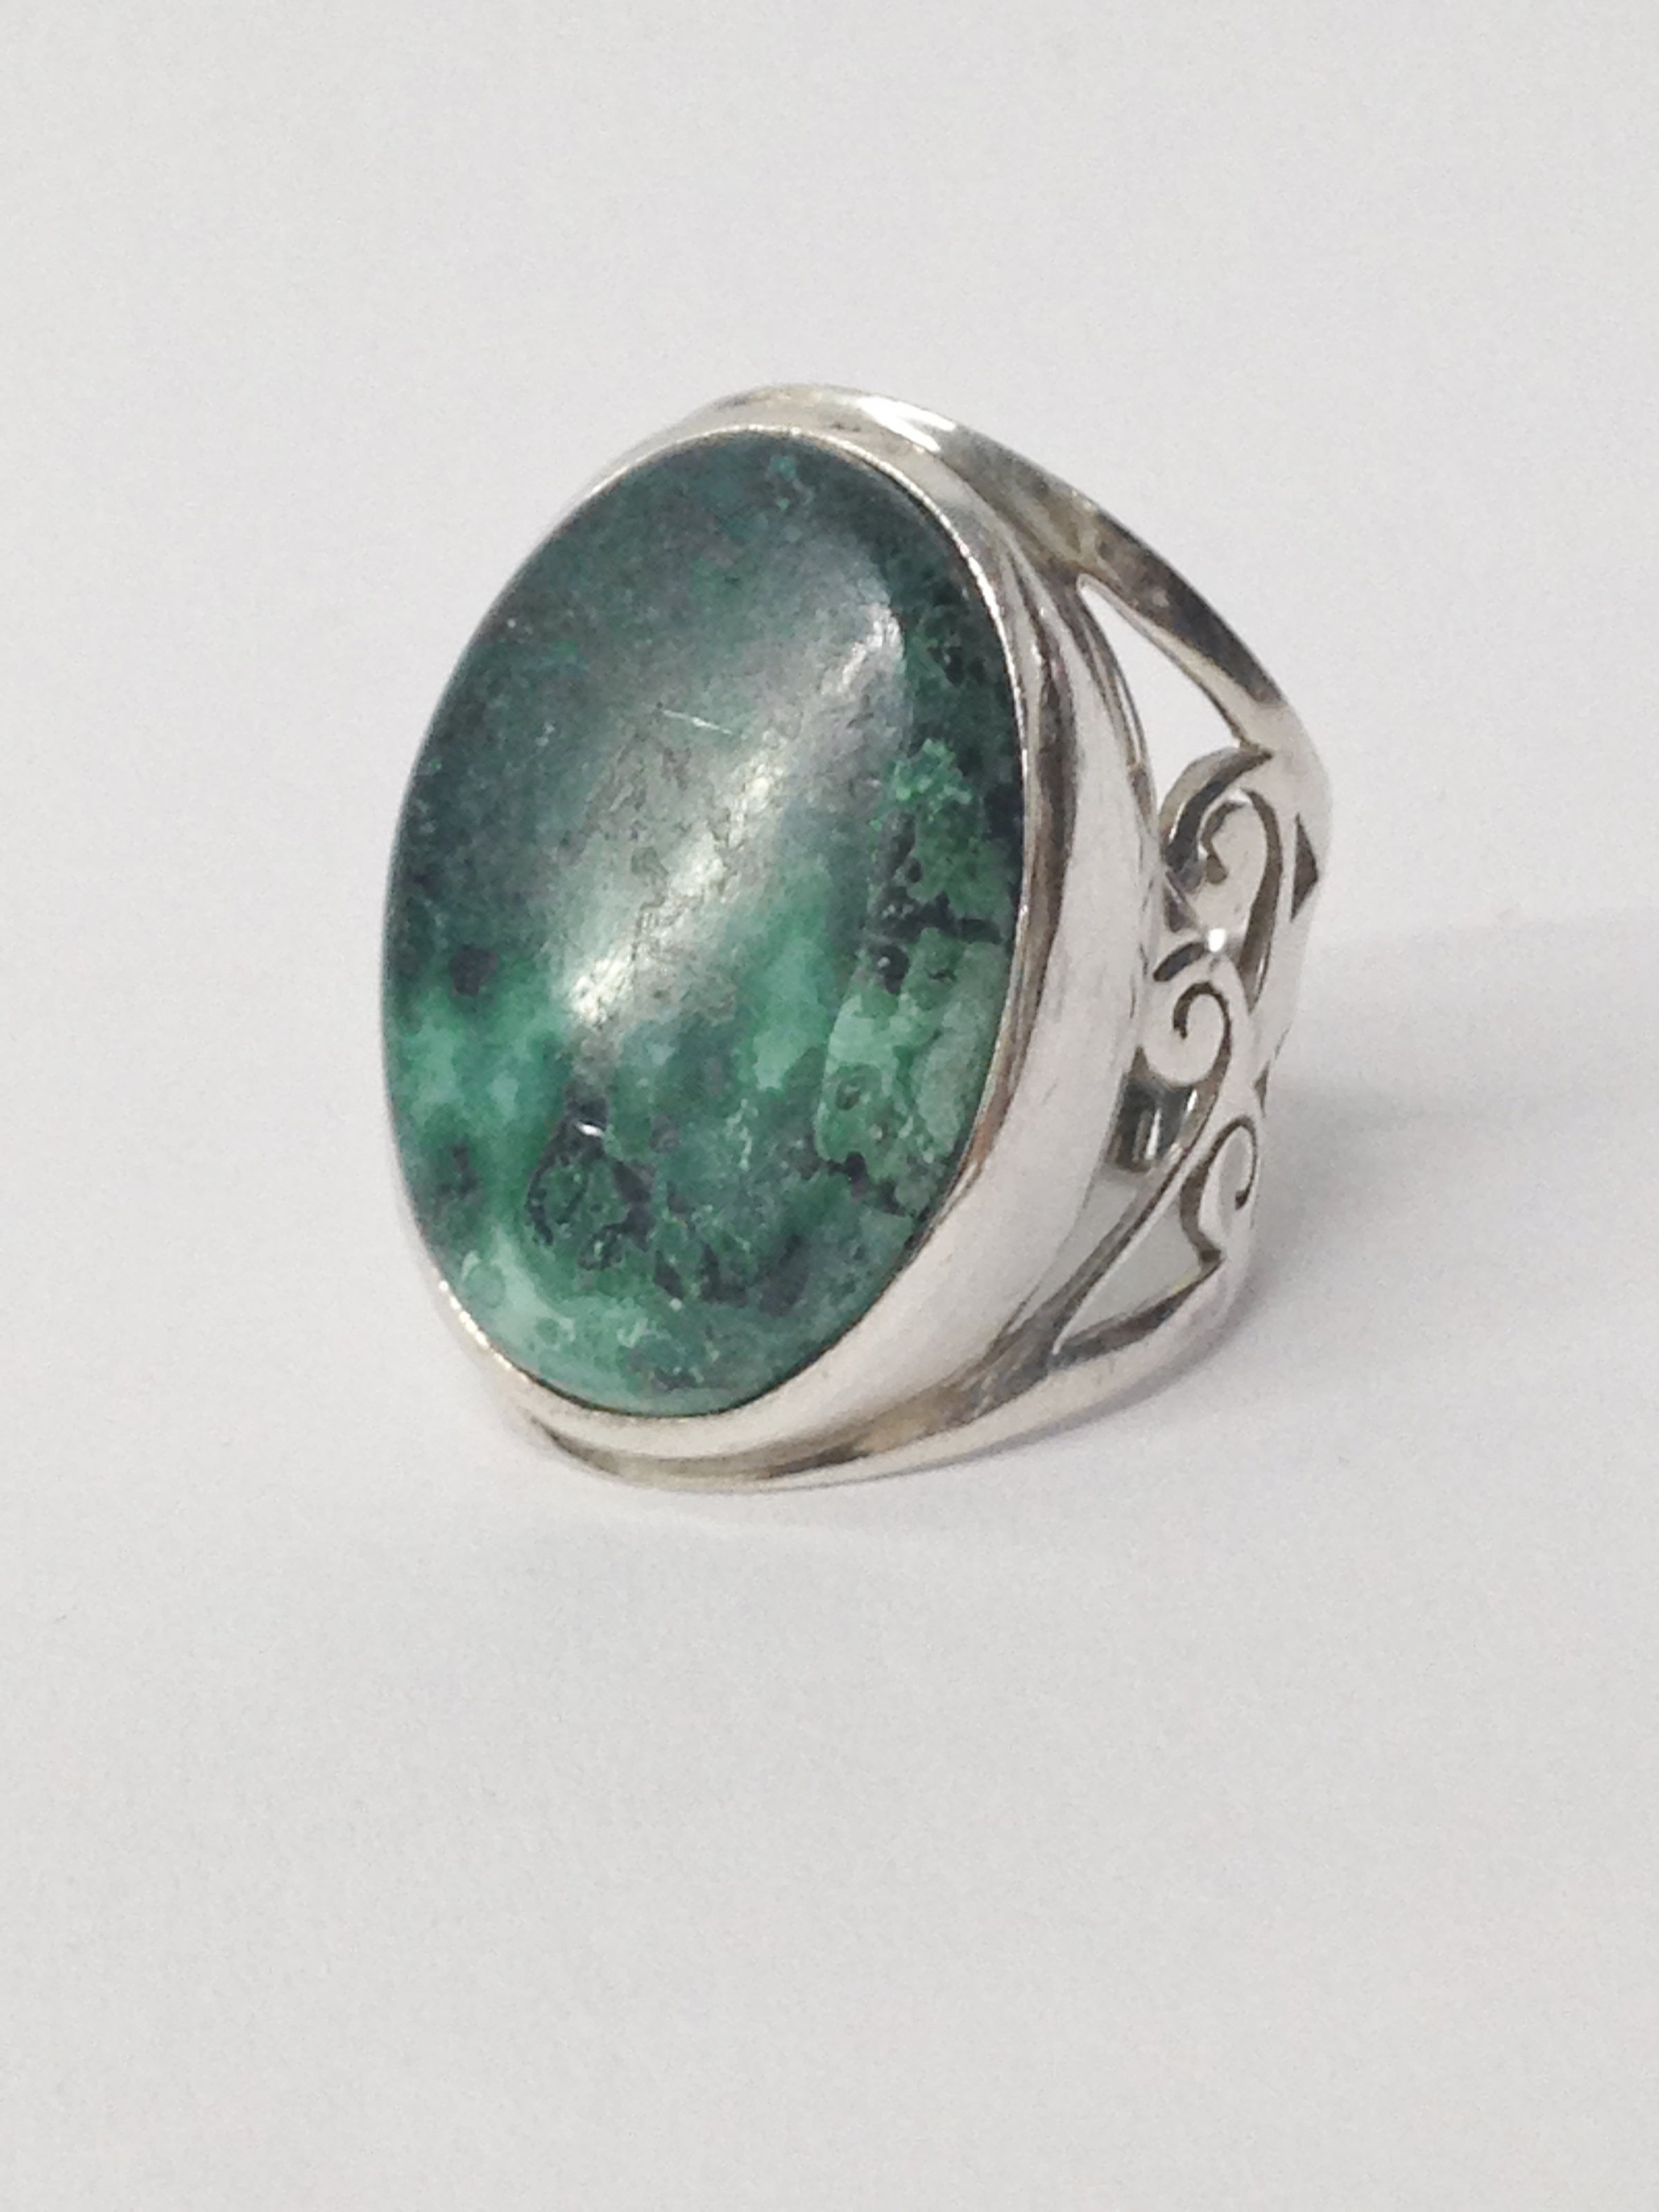 Large Oval Green Turquoise Gemstone .925 Sterling Silver Ring www.hersandhistreasures.com/collections/sterling-silver-jewelry